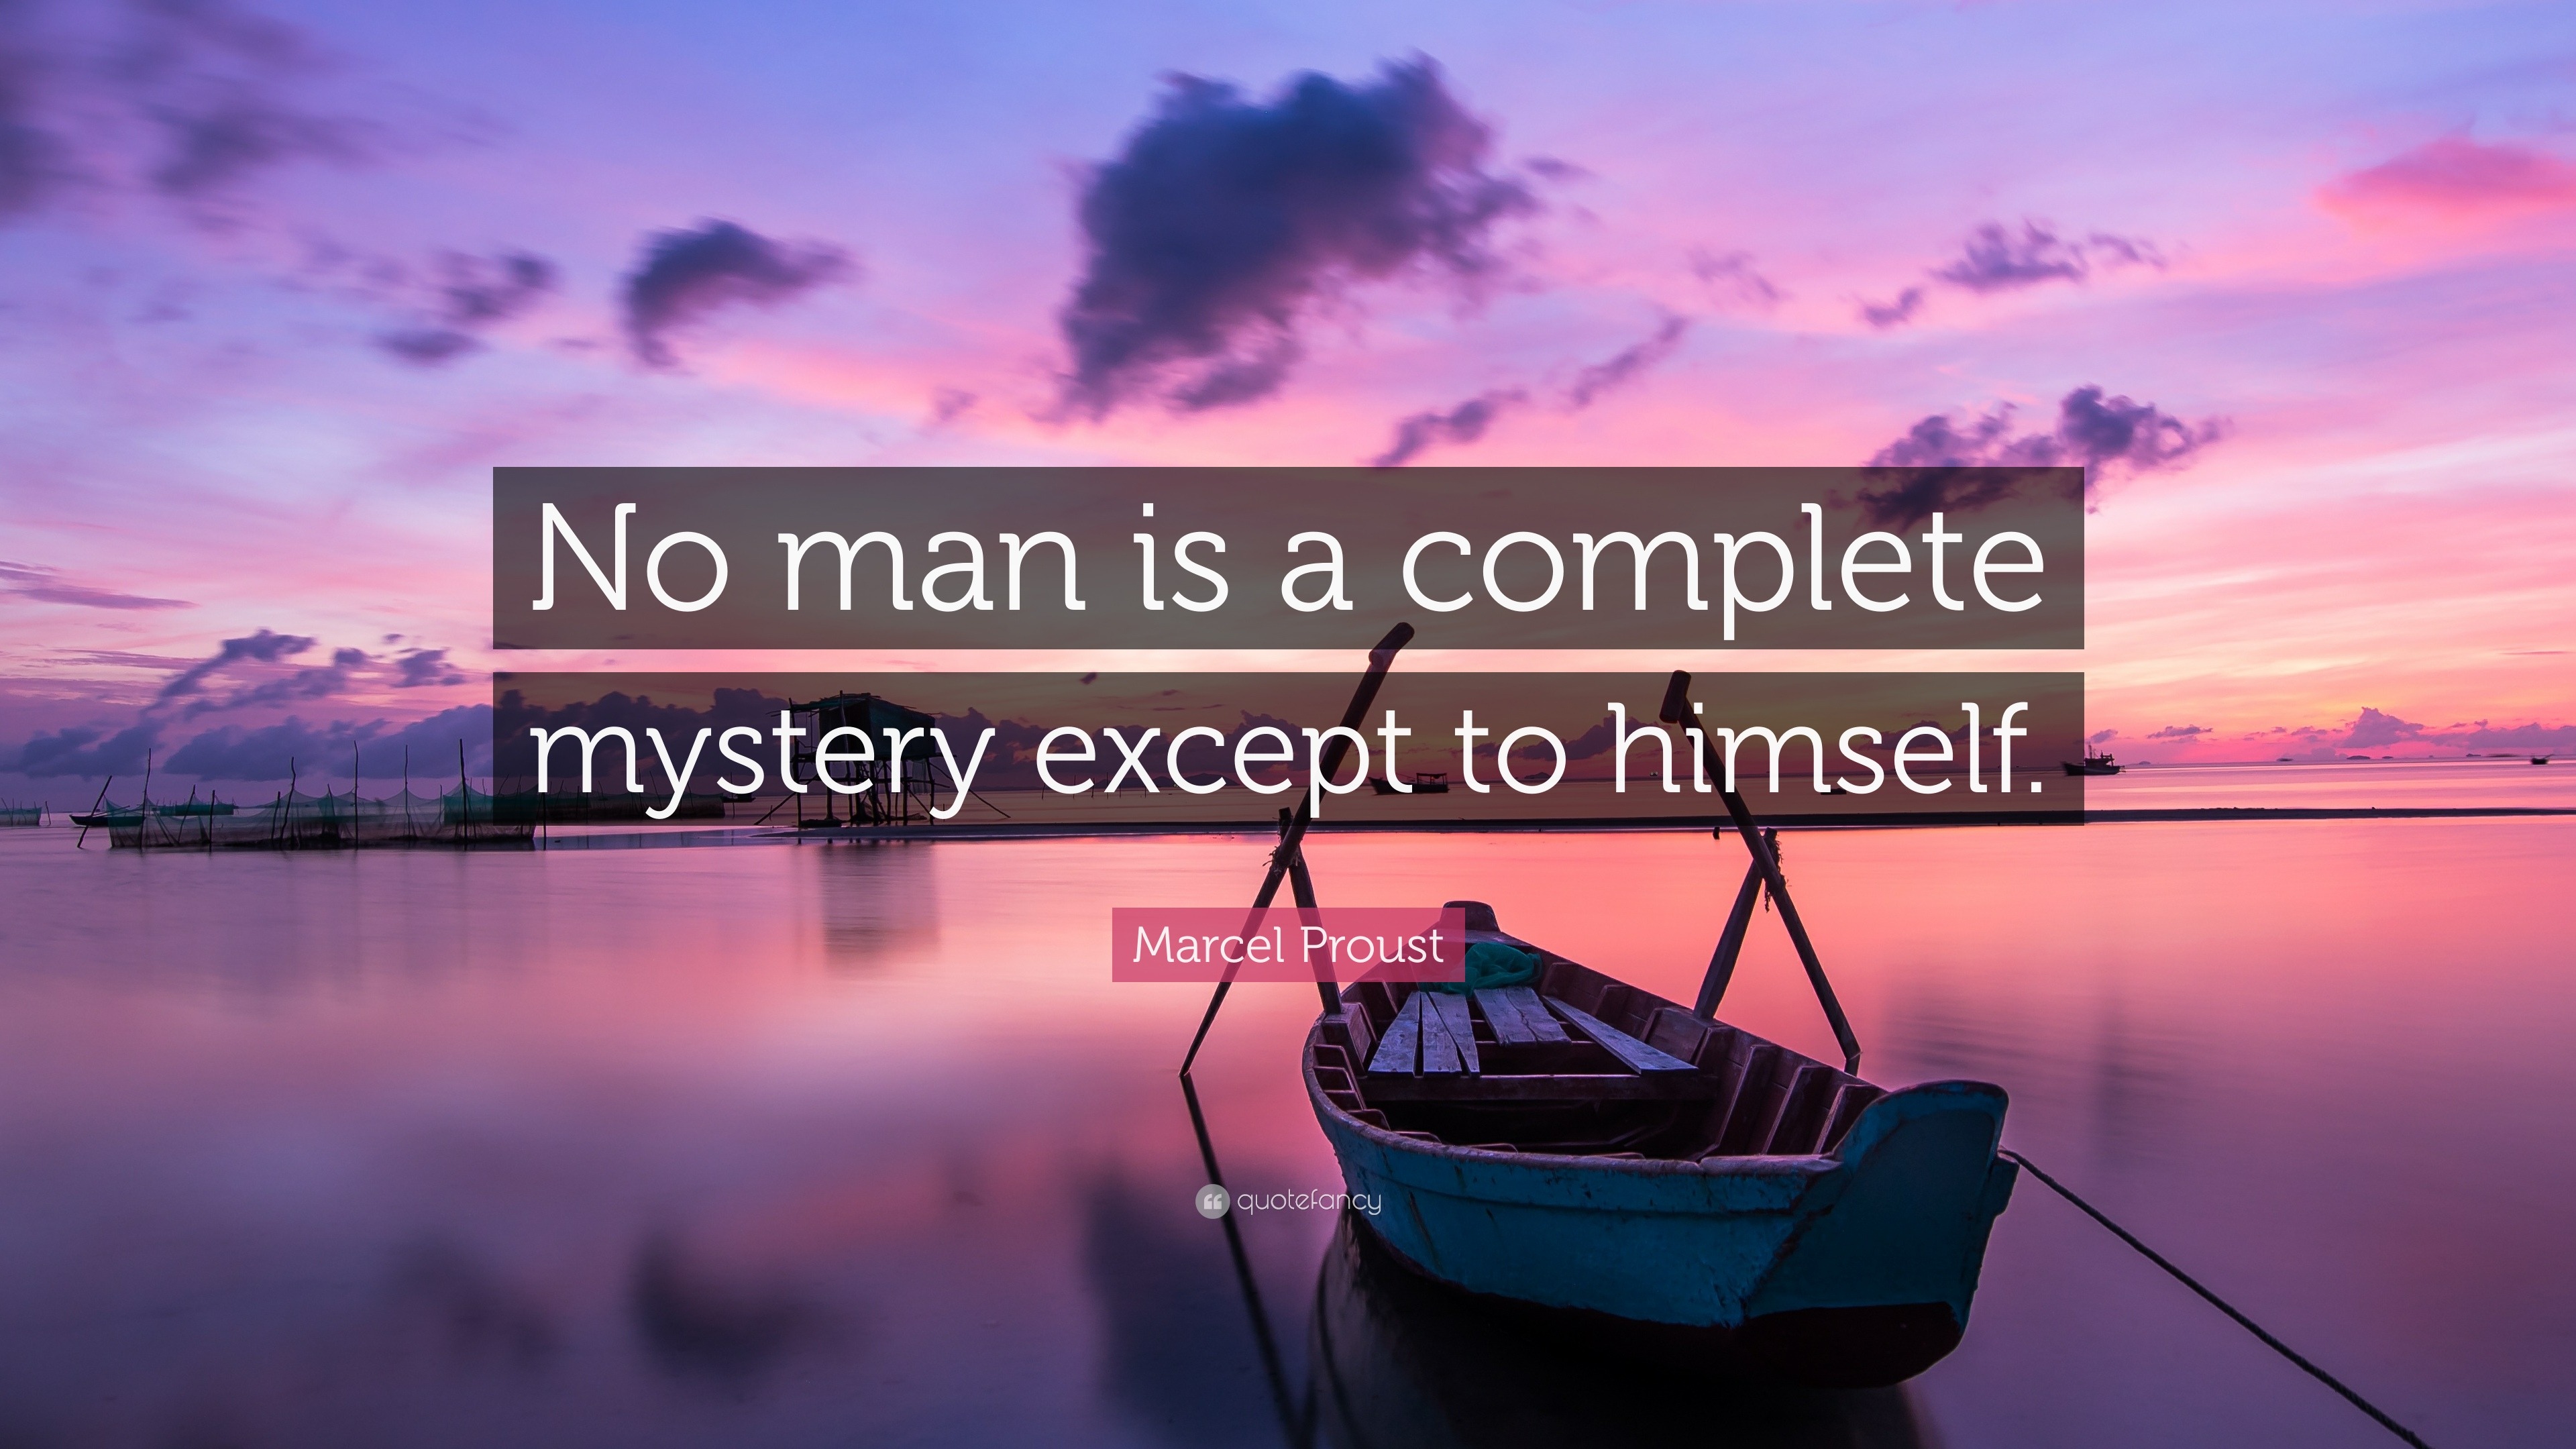 Marcel Proust Quote: “No man is a complete mystery except to himself.”